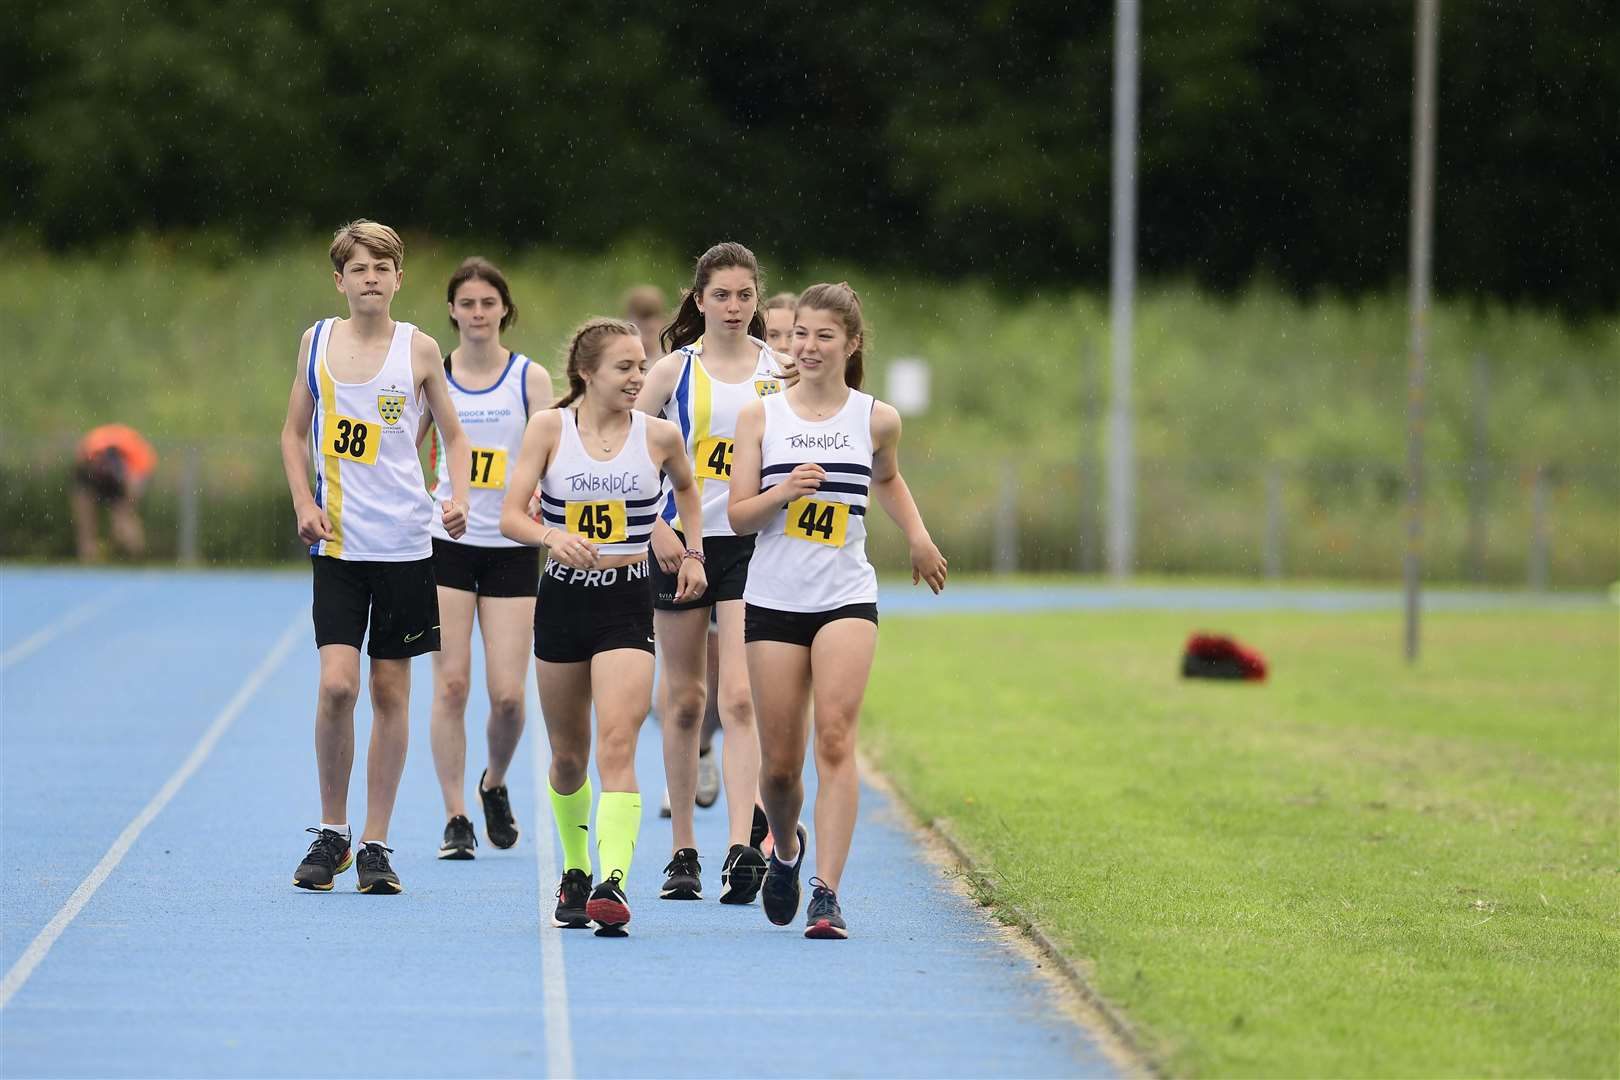 Competitors in the 1000m walk at the KYAL, Central Park, Dartford Picture: Barry Goodwin